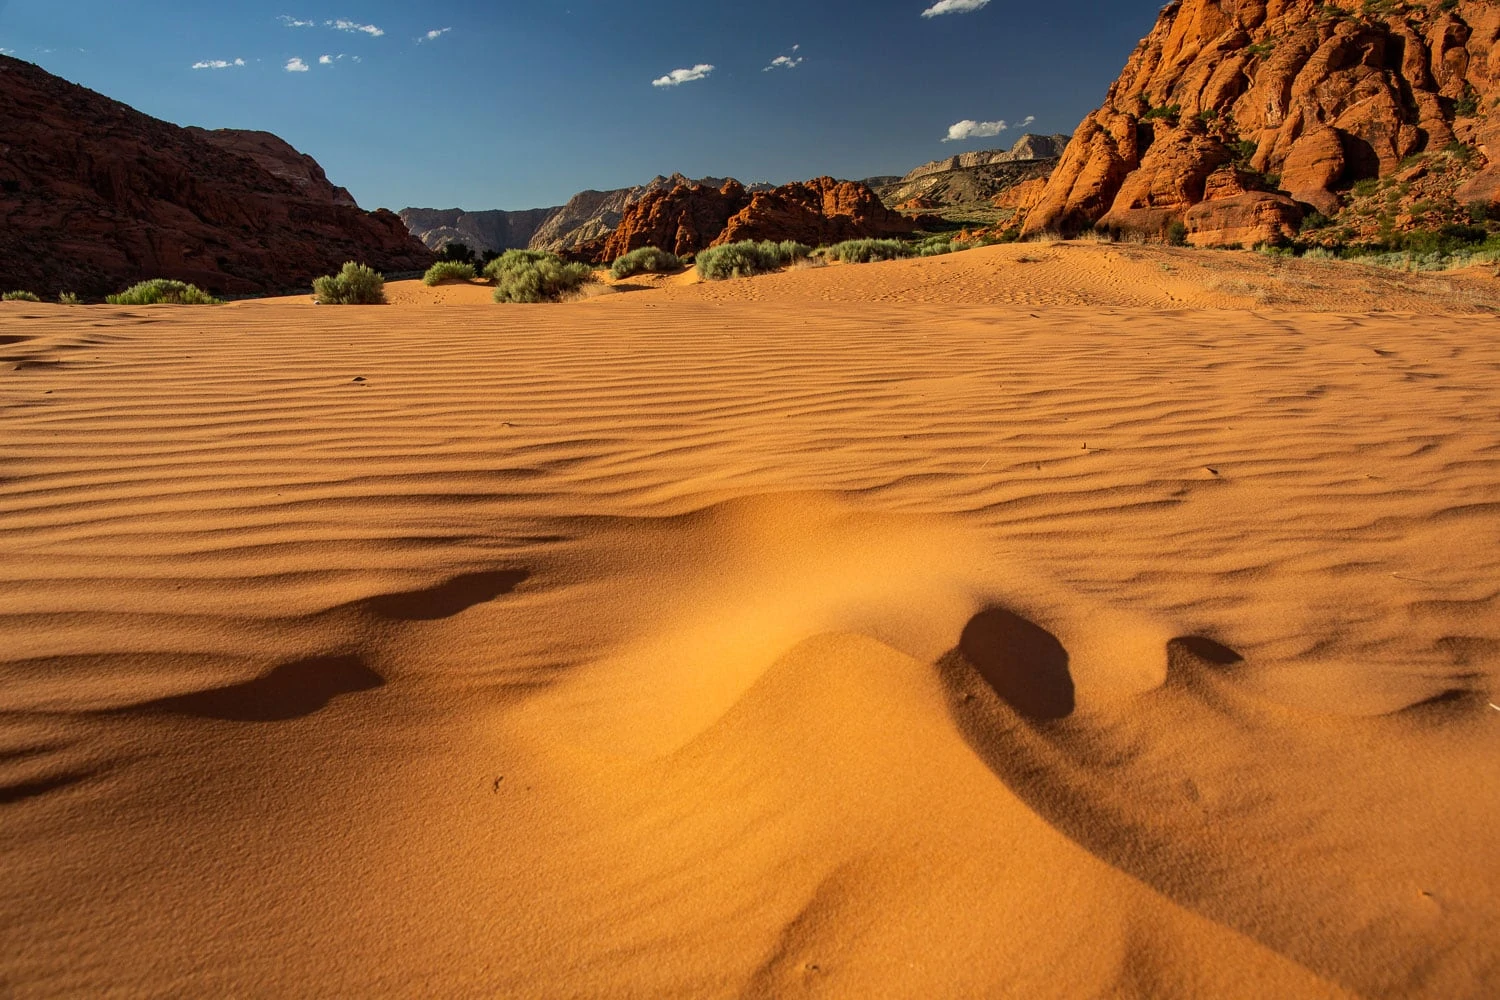 The sand dunes at Snow Canyon State Park is one of 4 elopement locations approved by the park.